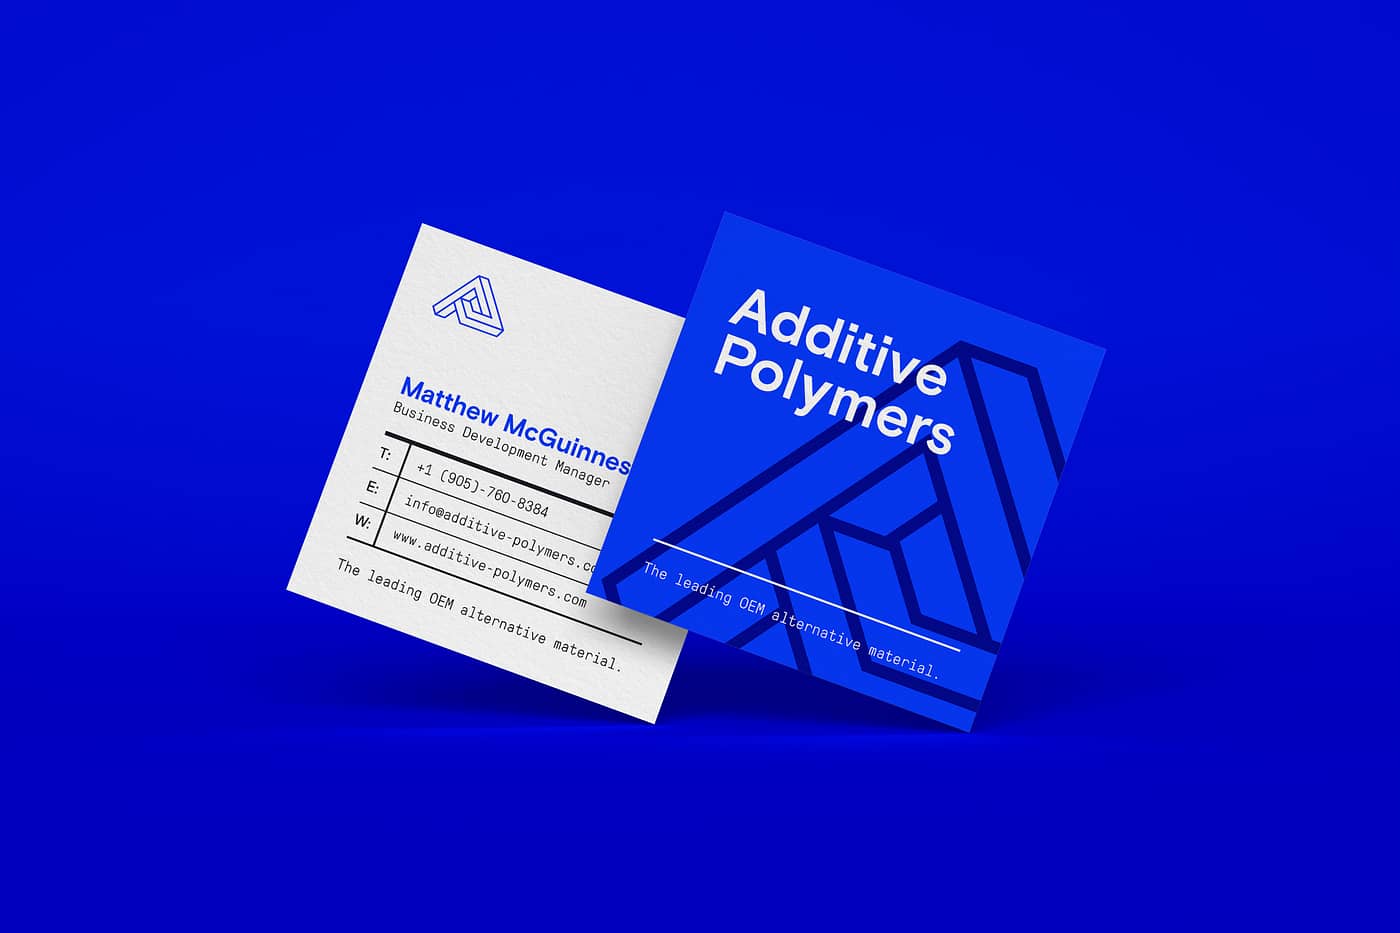 Bright blue and white business card for Additive Polymers. Reads: Matthew McGuinness